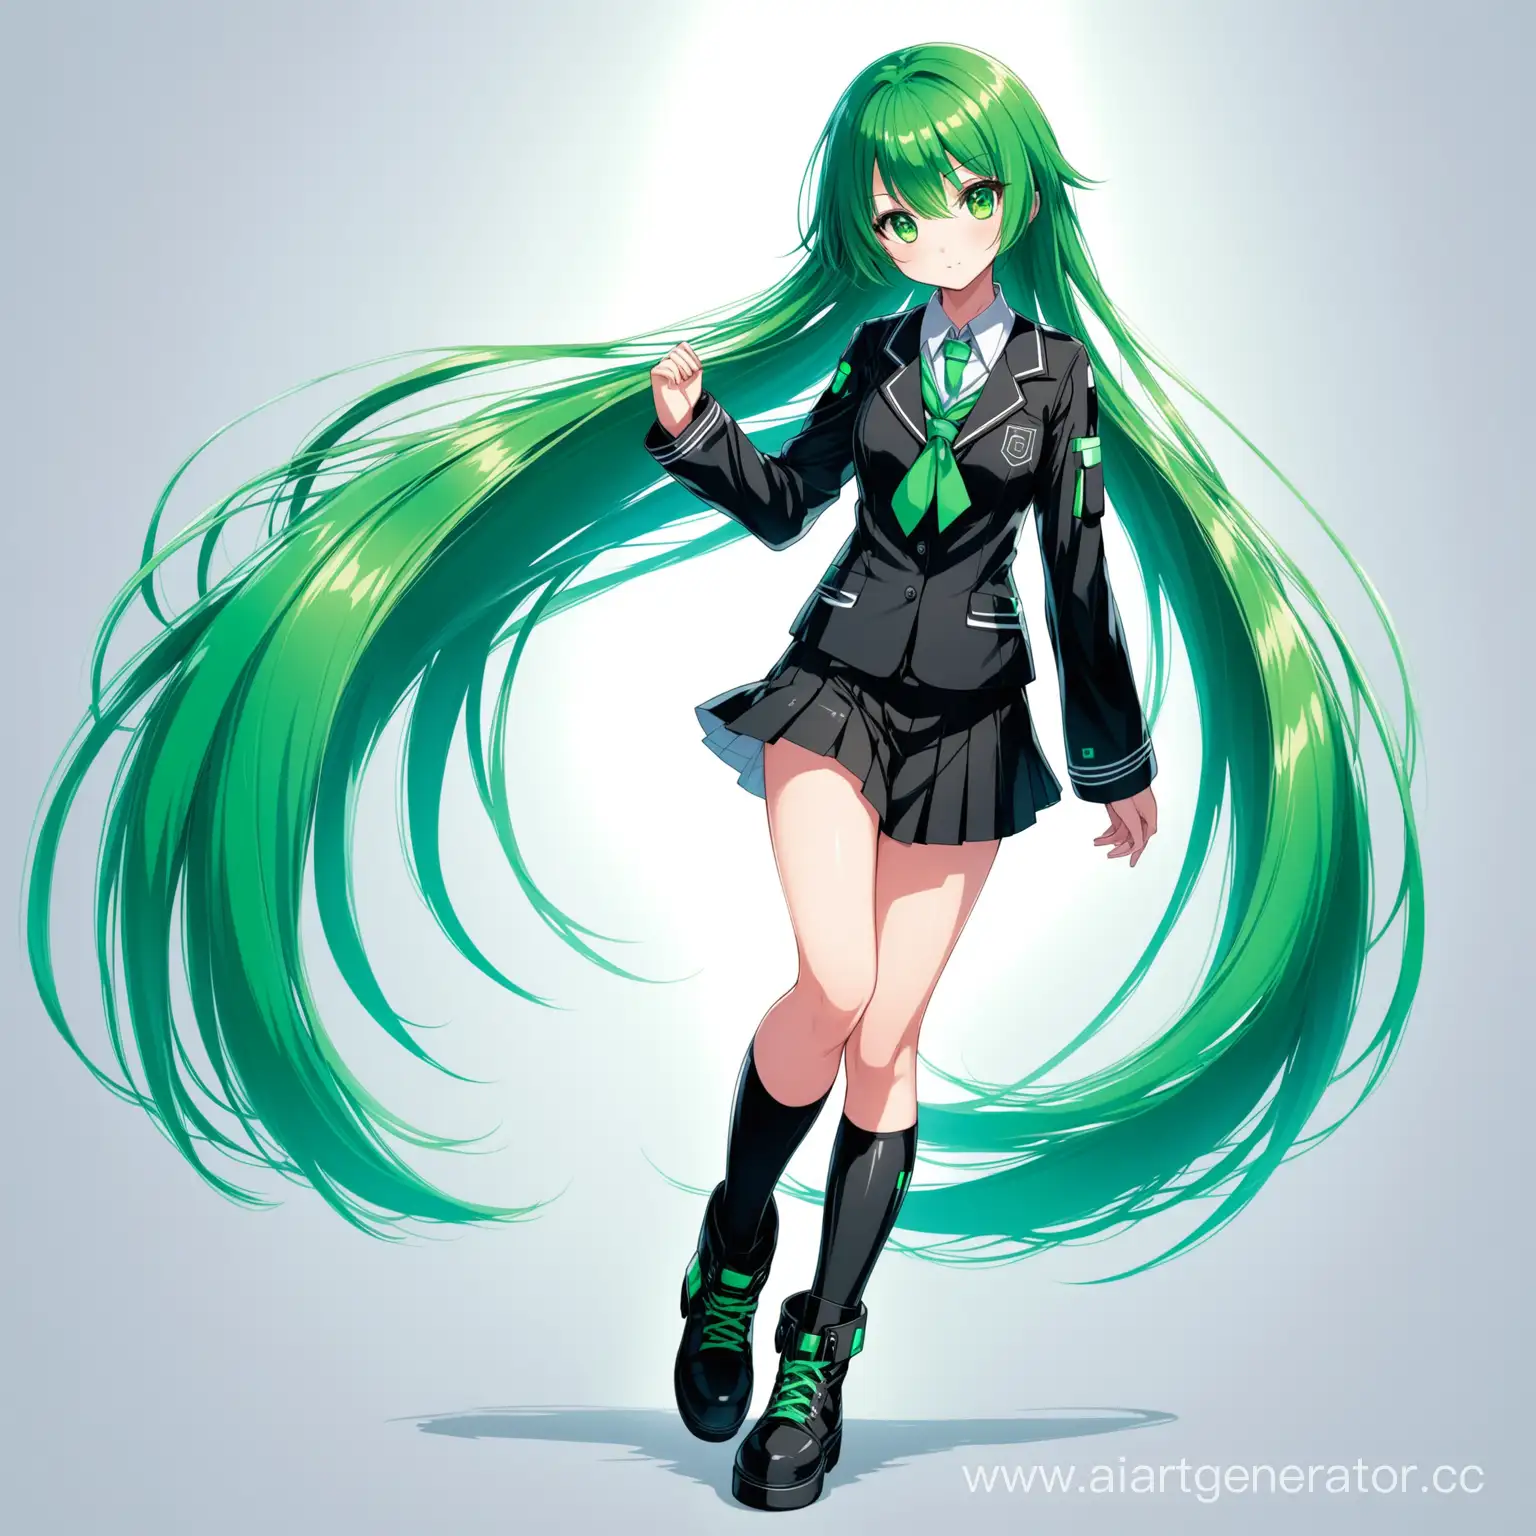 Futuristic-Anime-Schoolgirl-with-Green-Hair-and-Eyes